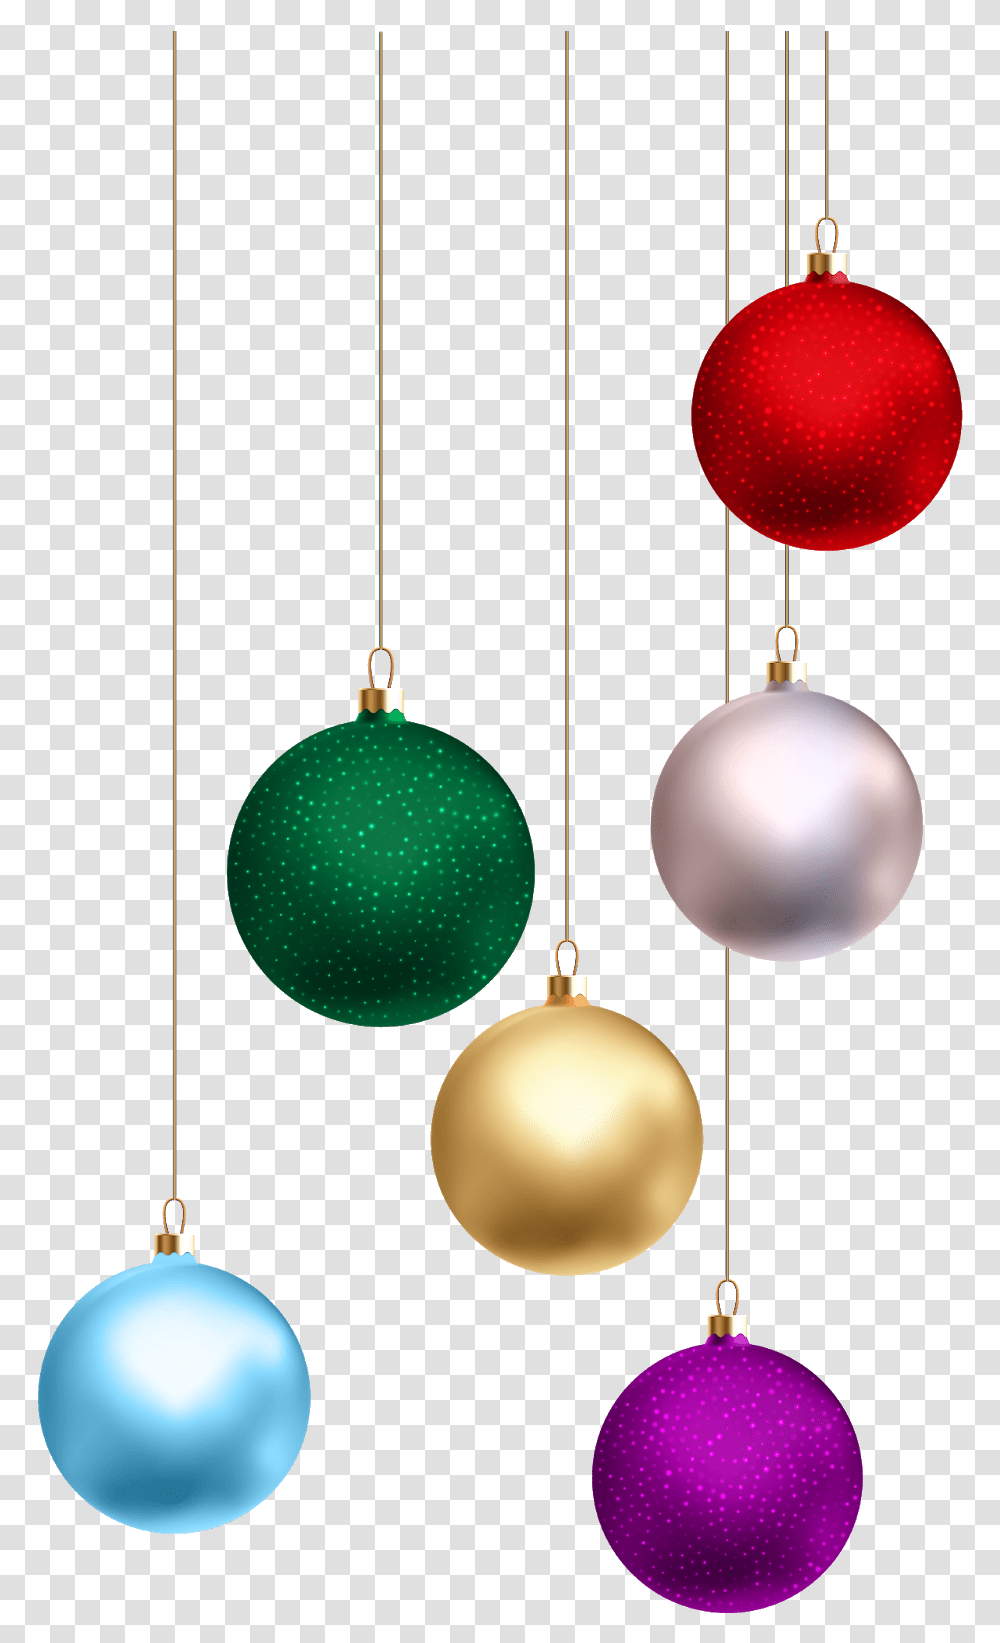 Christmas Hanging Ball Christmas Balls Background, Lighting, Ornament, Sphere, Accessories Transparent Png